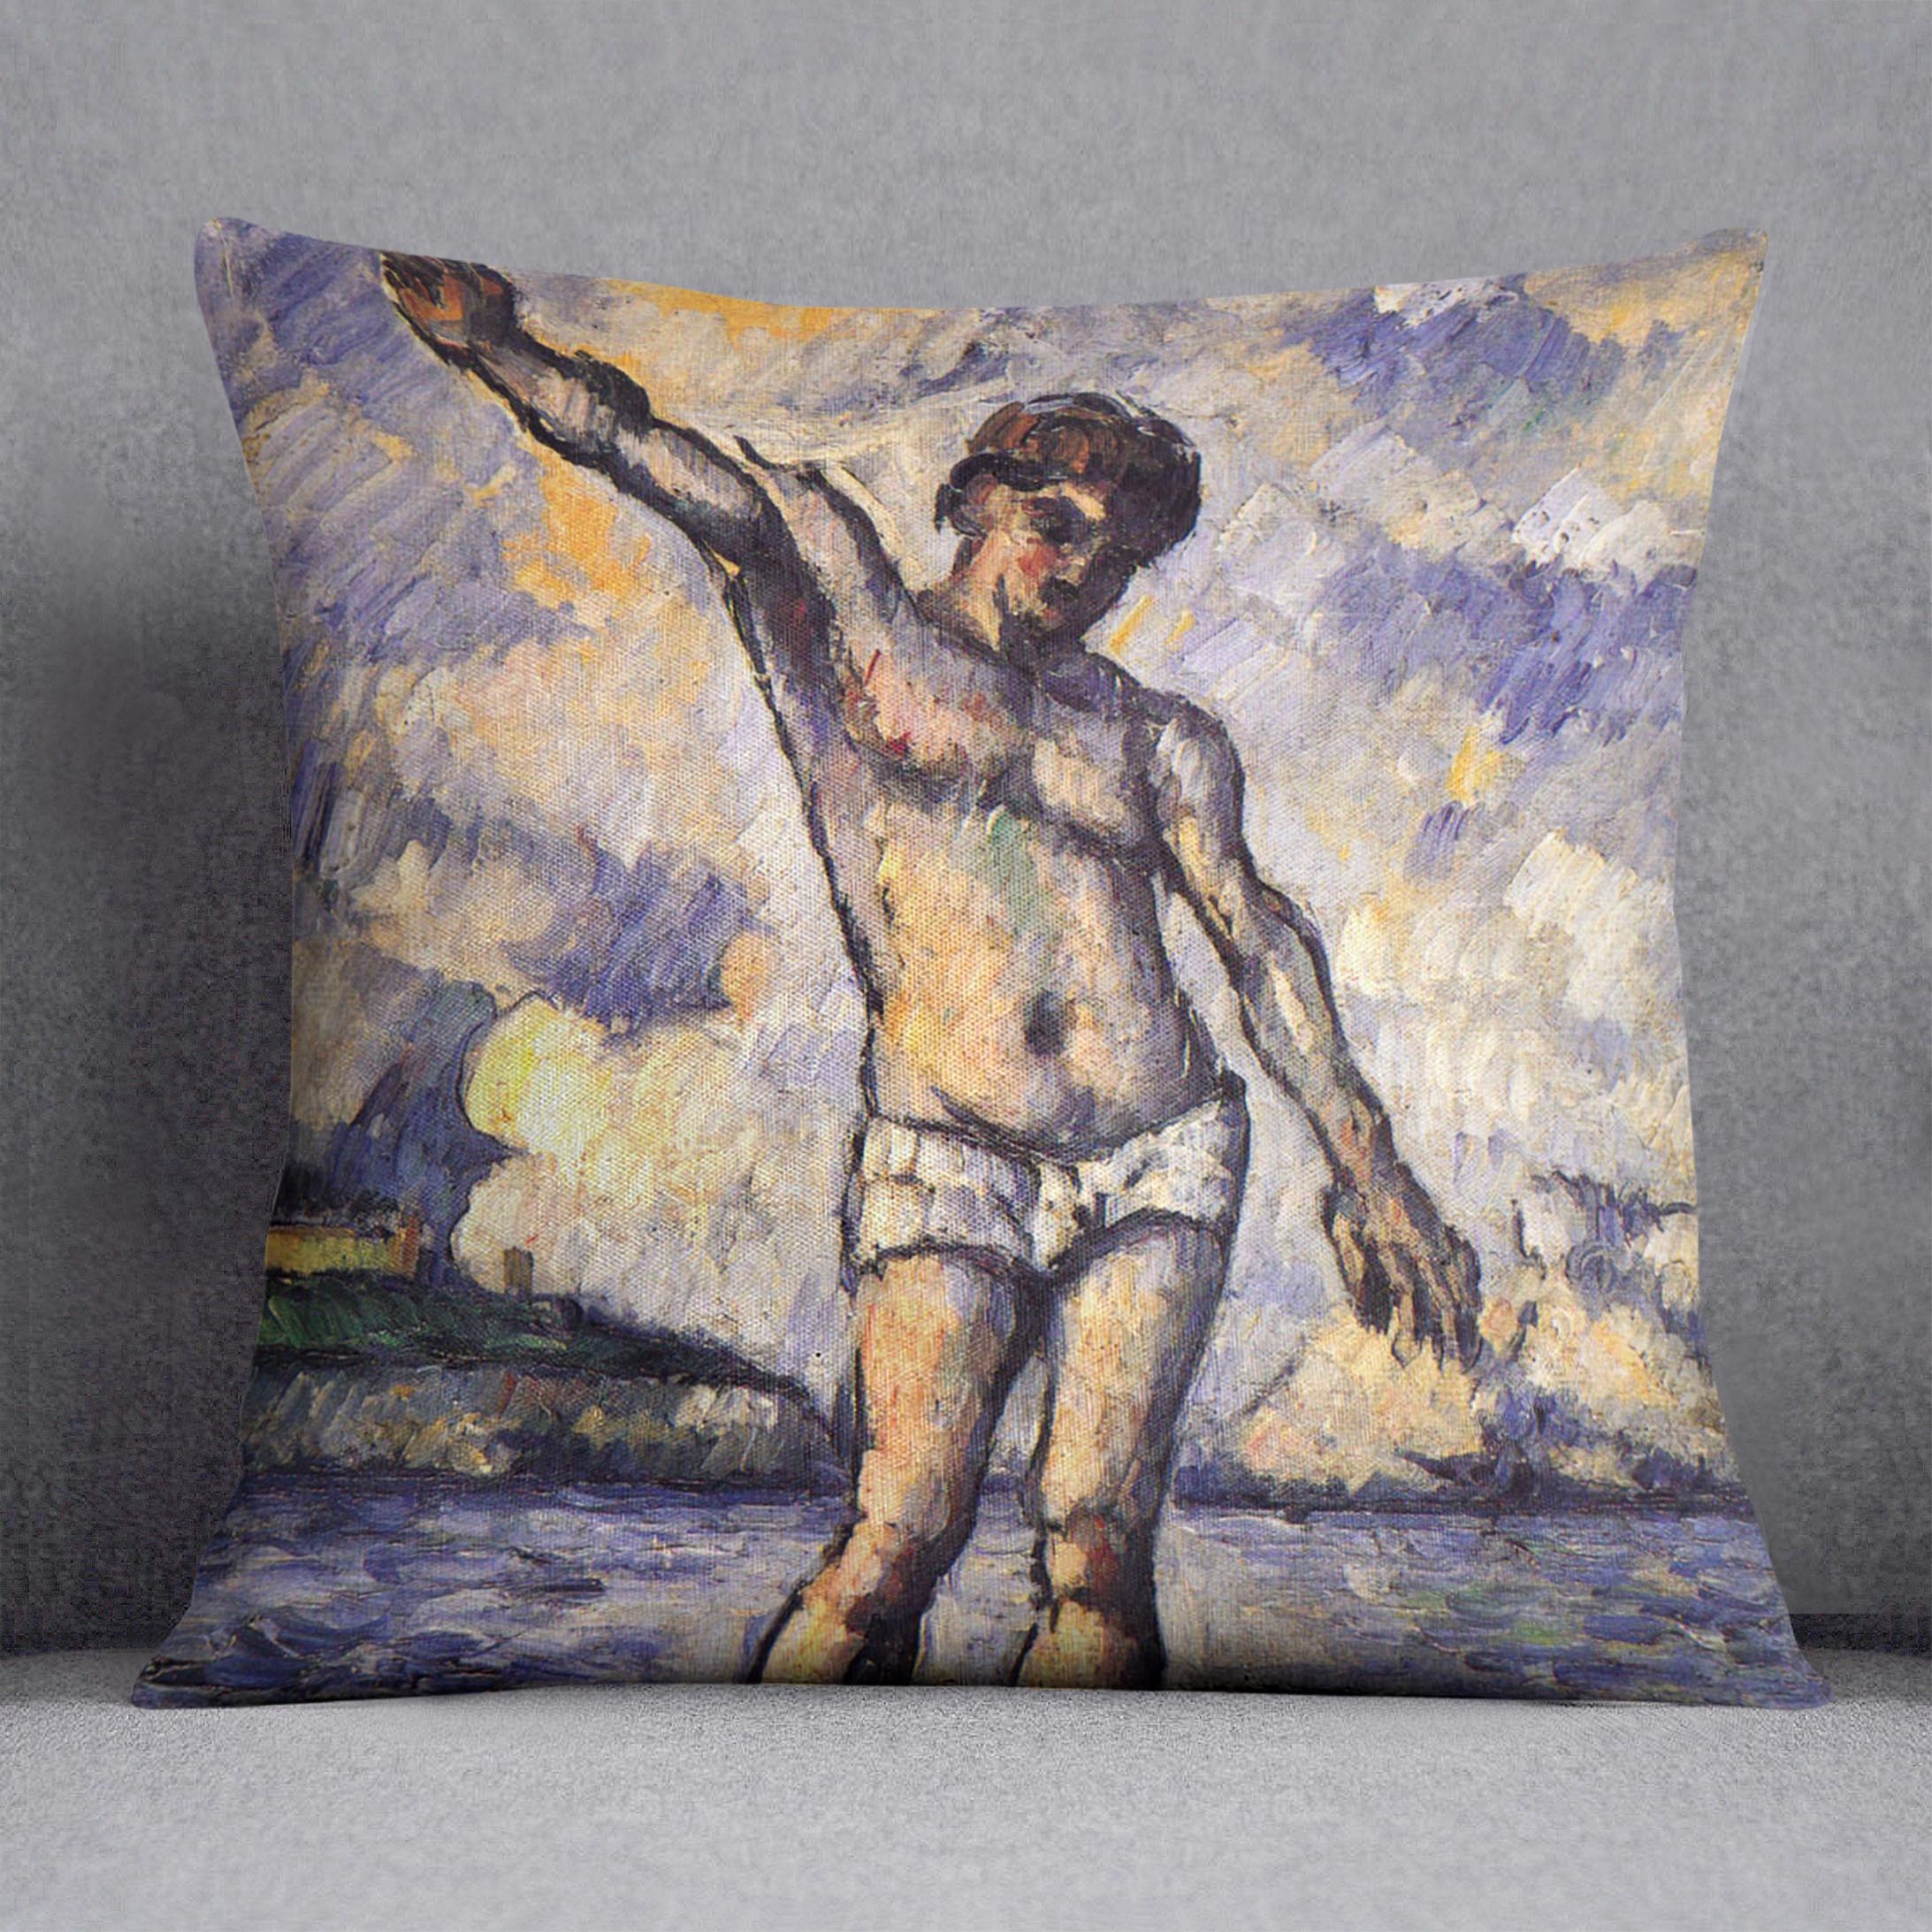 Swimmer with outstretched arms by Cezanne Cushion - Canvas Art Rocks - 1